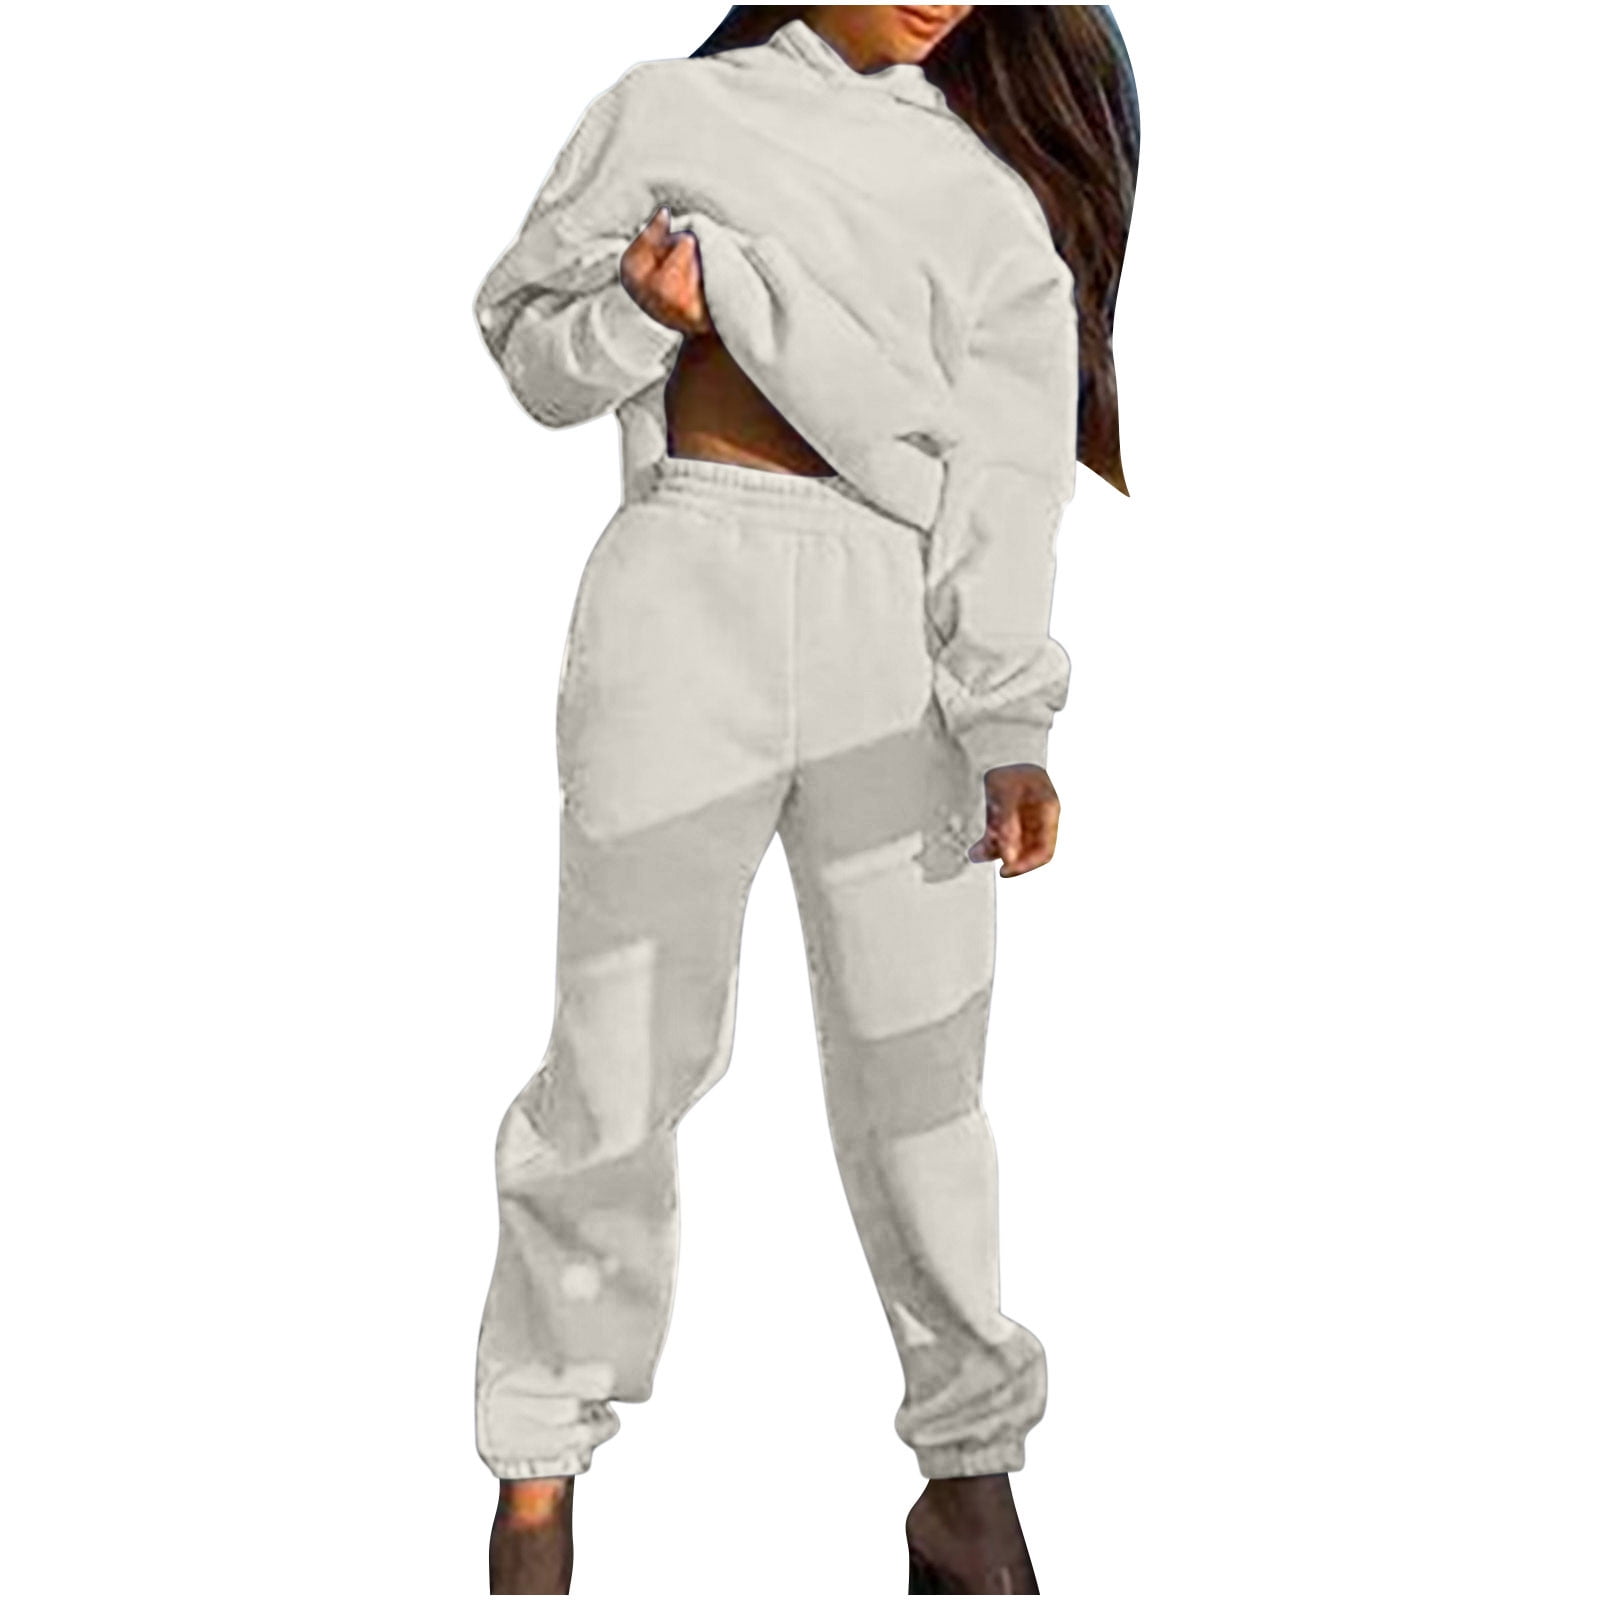 Women's 2 Piece Outfits Casual Solid Long Sleeve Hooded Sweatsuit and  Sweatpants Sets Sweatsuits Loungewear 